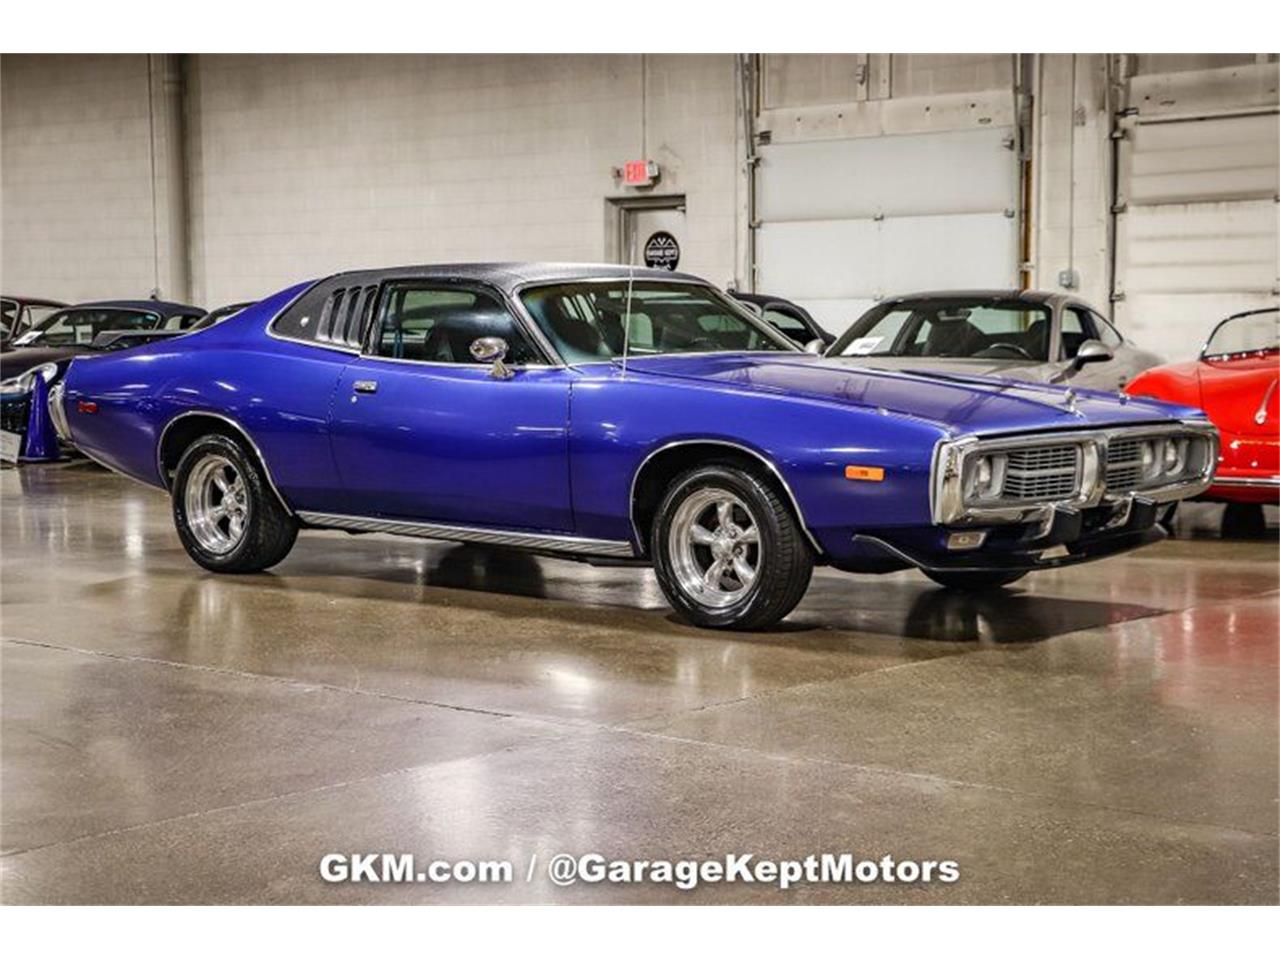 For Sale: 1974 Dodge Charger in Grand Rapids, Michigan for sale in Grand Rapids, MI